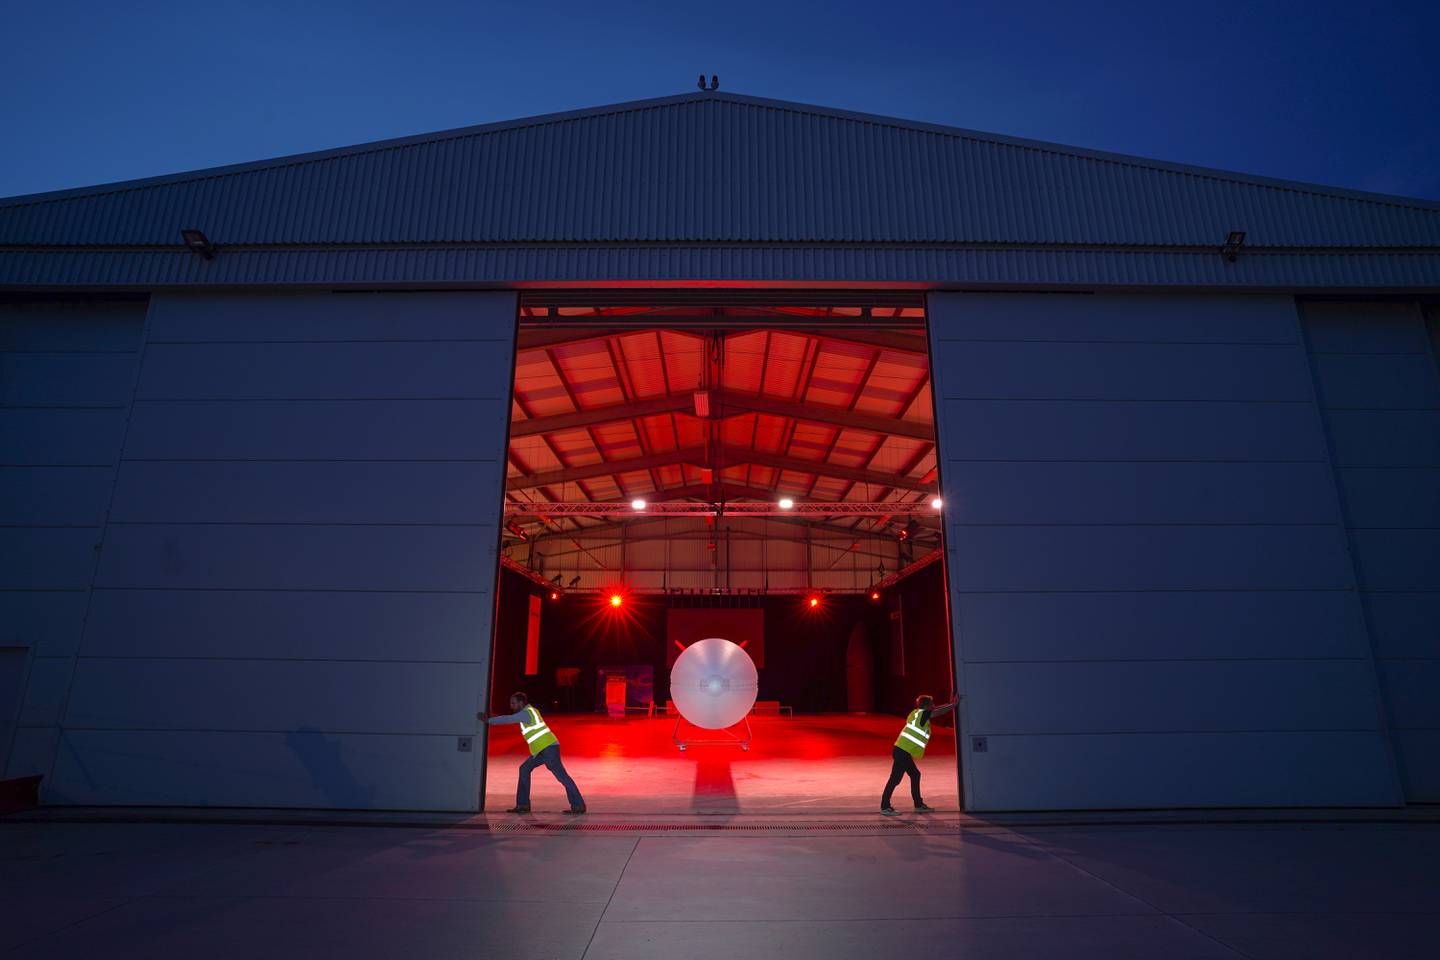 The Virgin Orbit LauncherOne rocket in its hangar at Newquay Airport, England. Getty Images